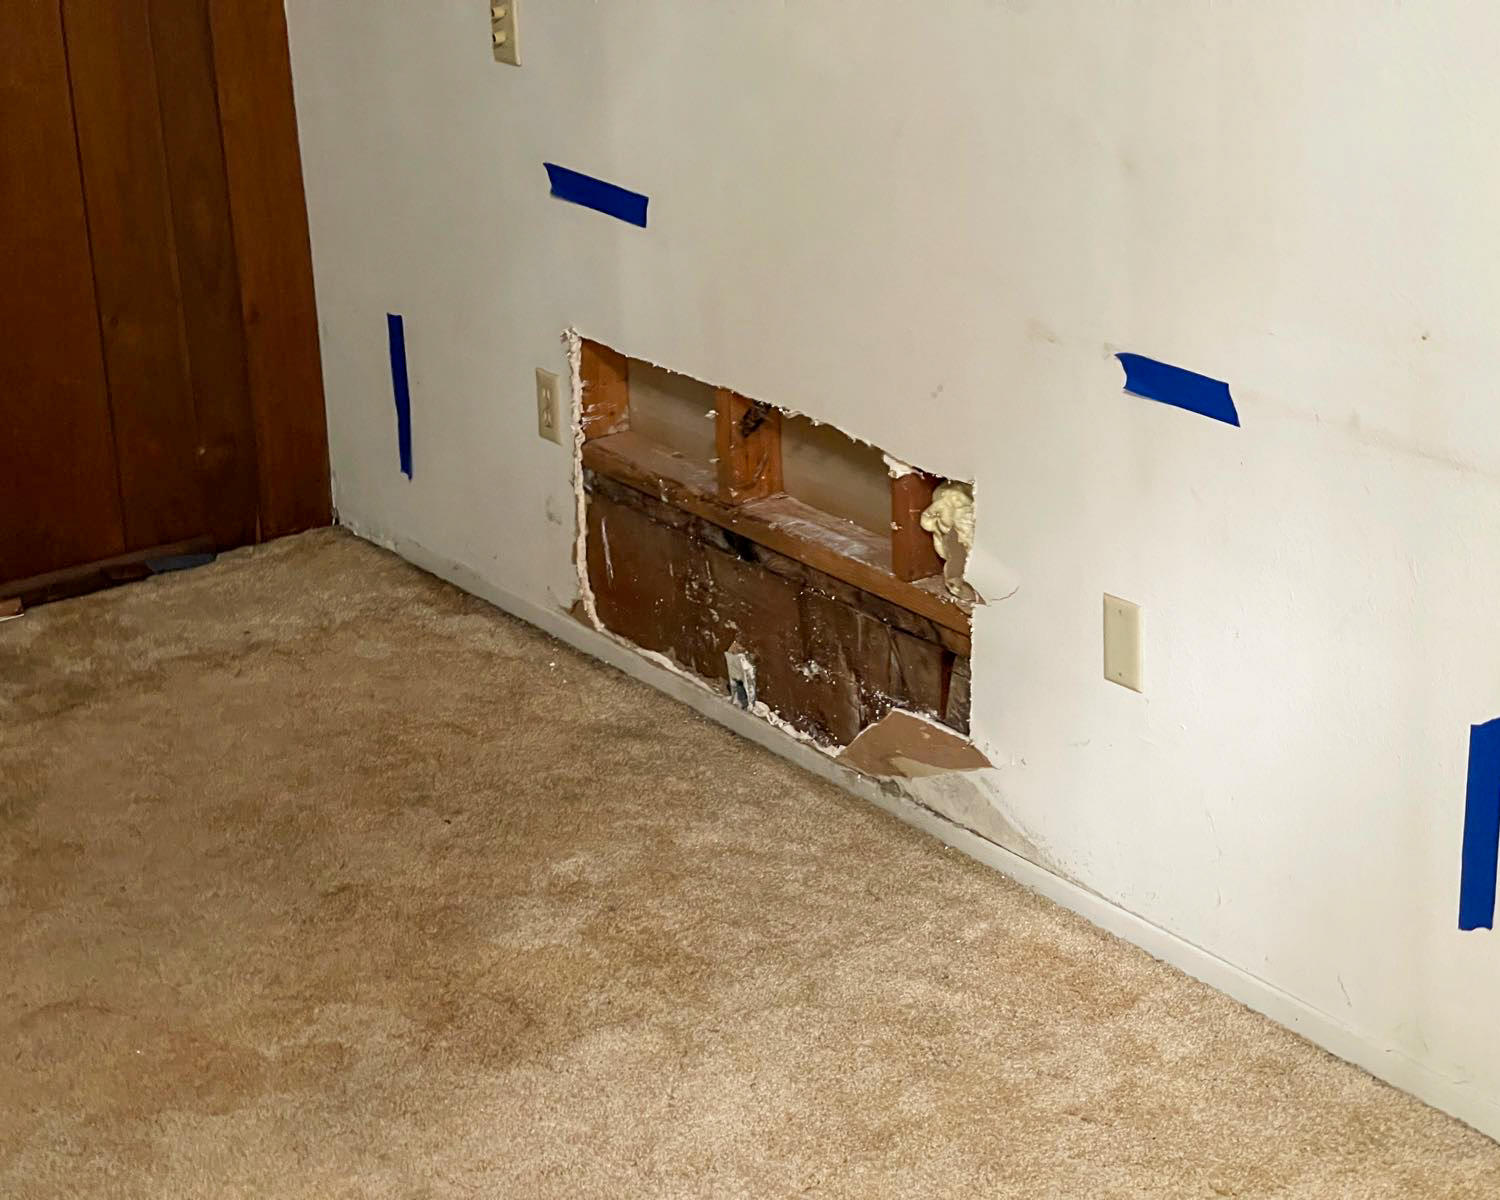 SERVPRO of Auburn/Enumclaw is ready to respond 24/7 for your restoration emergency in Algona, WA. Our team is trained for any size disaster, commercial or residential, Give us a call today!